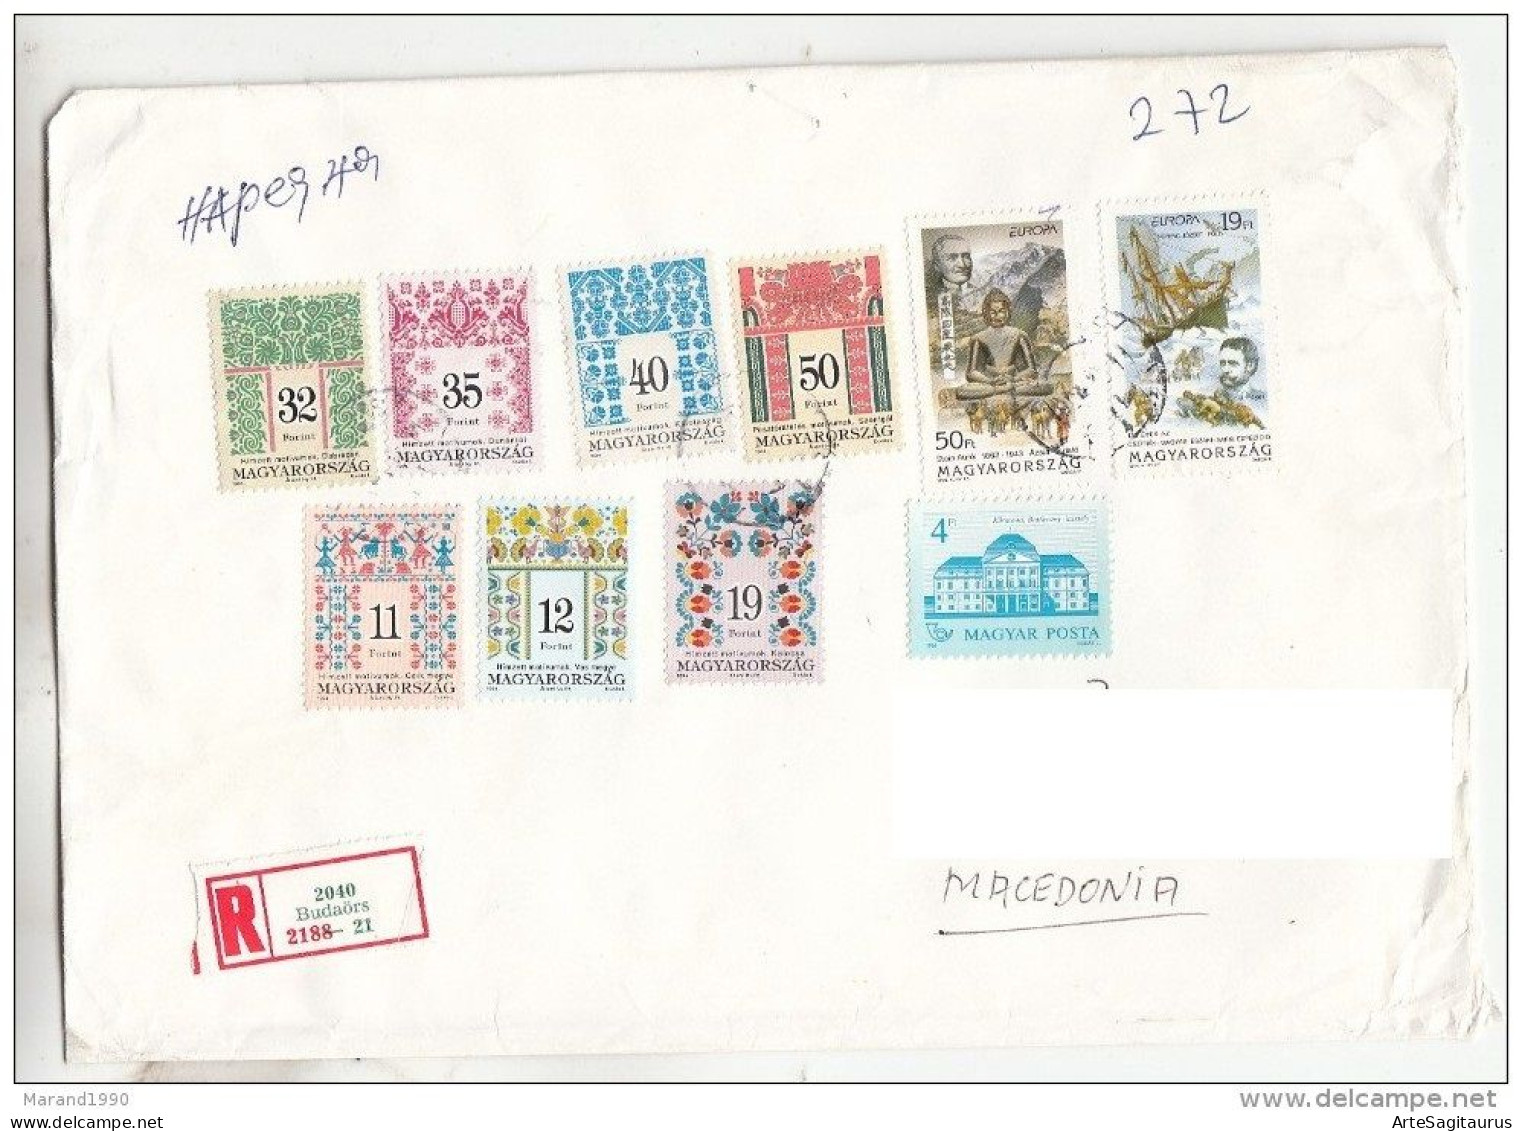 HUNGARY, R-COVER, REPUBLIC OF MACEDONIA, (008) - Lettres & Documents